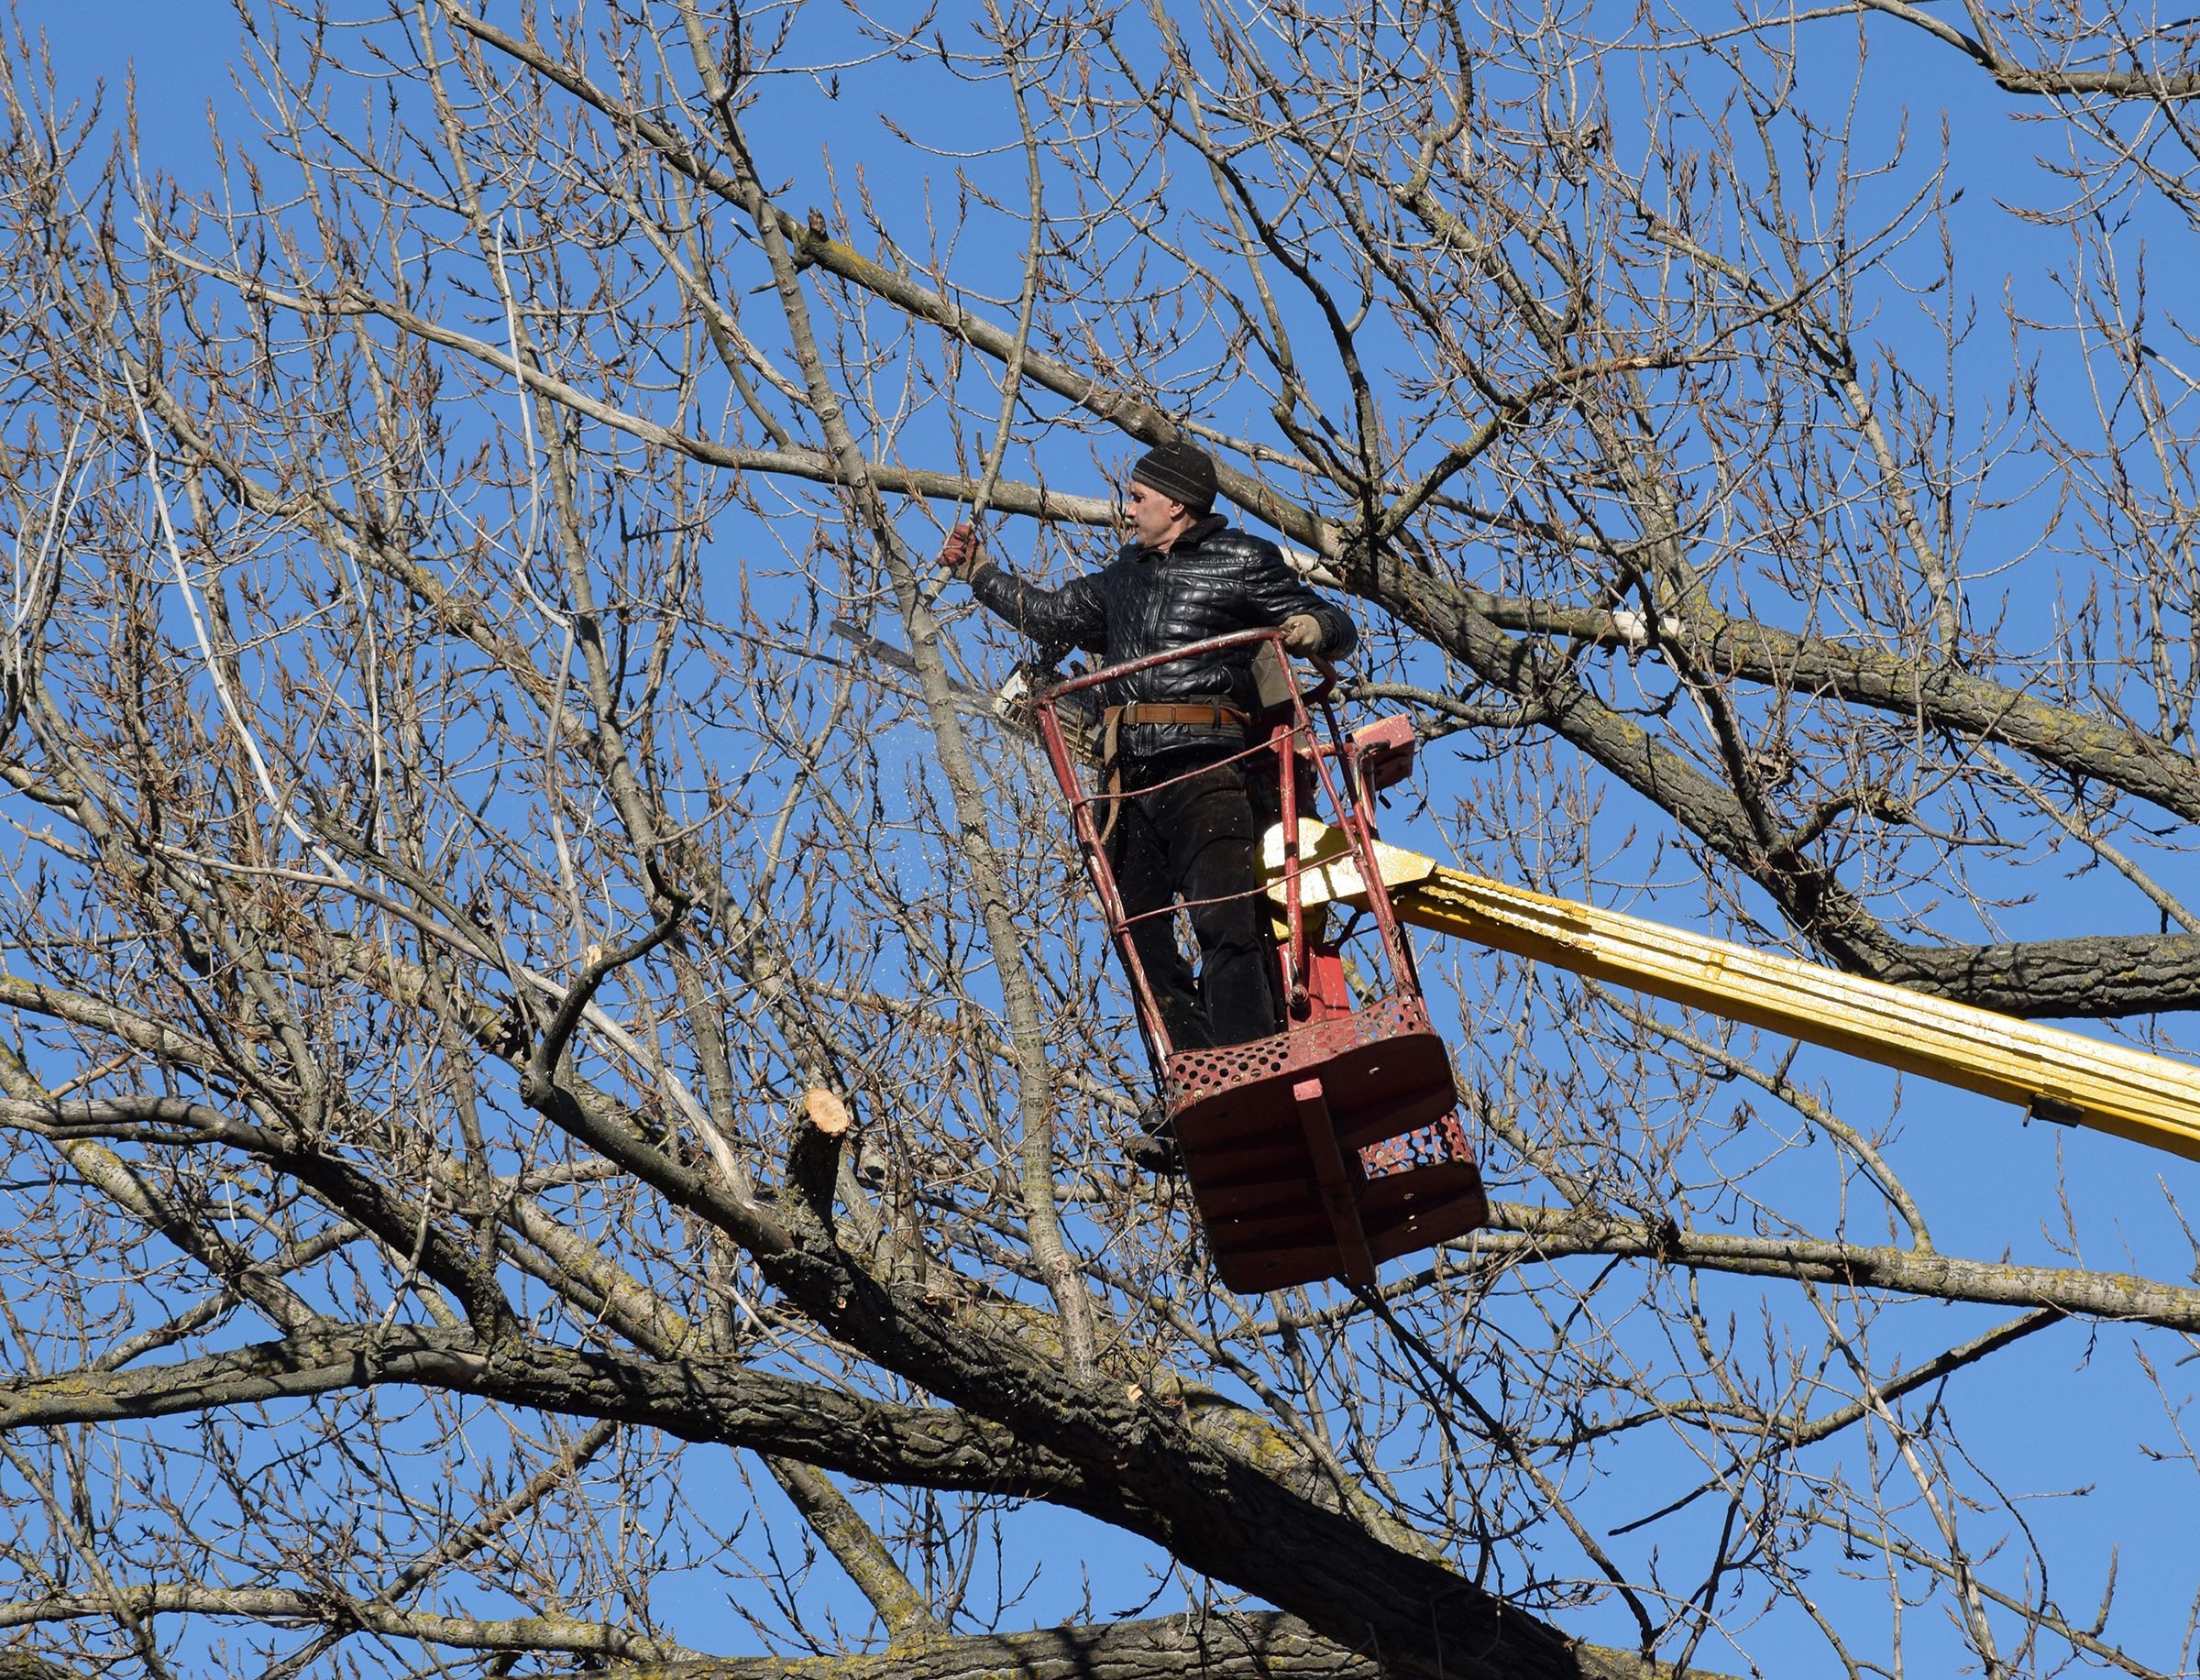 Professional tree service removing dead branches off of several trees